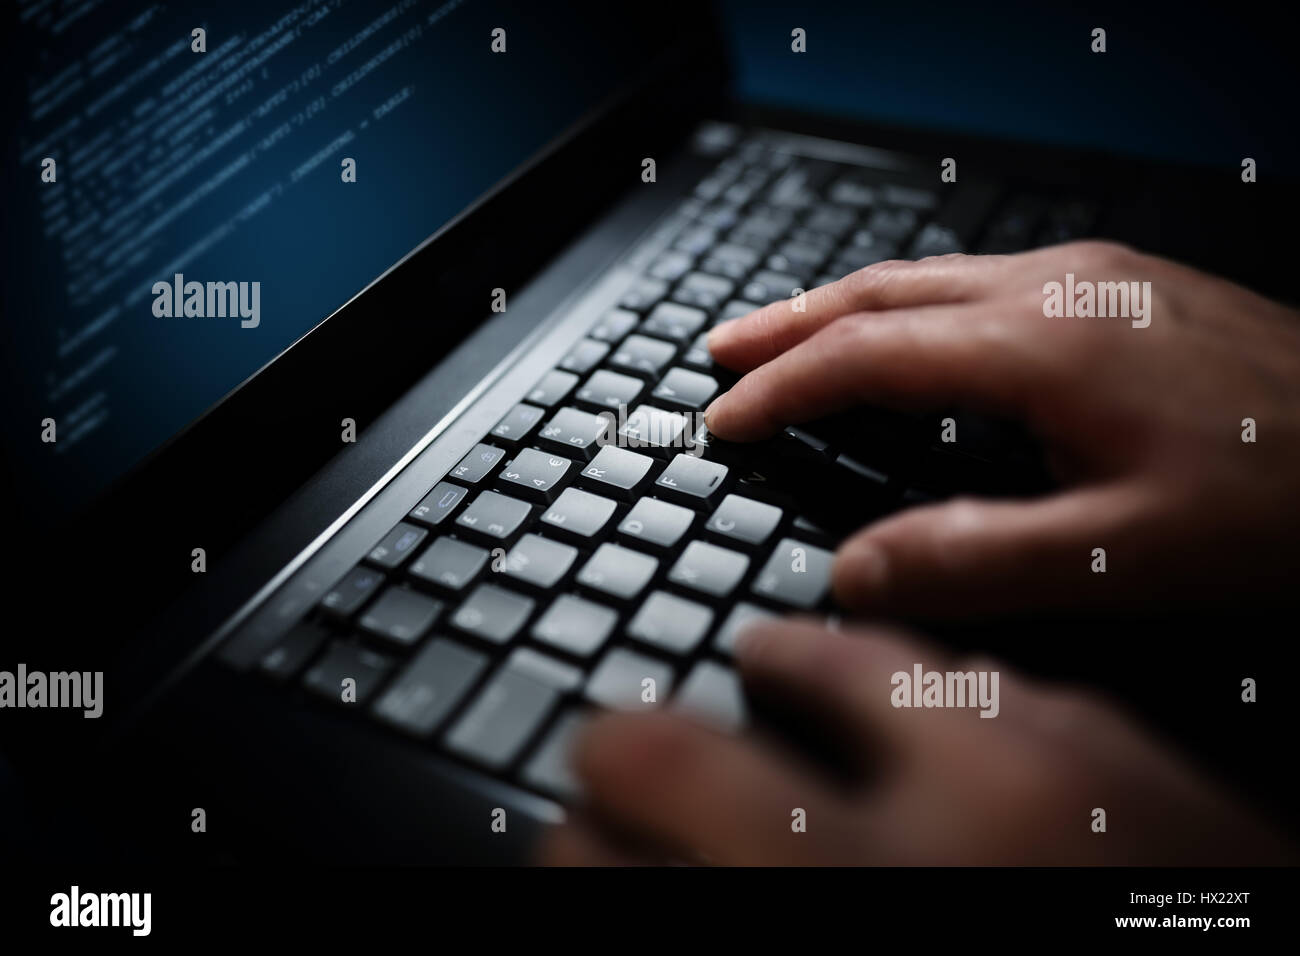 Programmer or computer hacker typing code on laptop keyboard Stock Photo